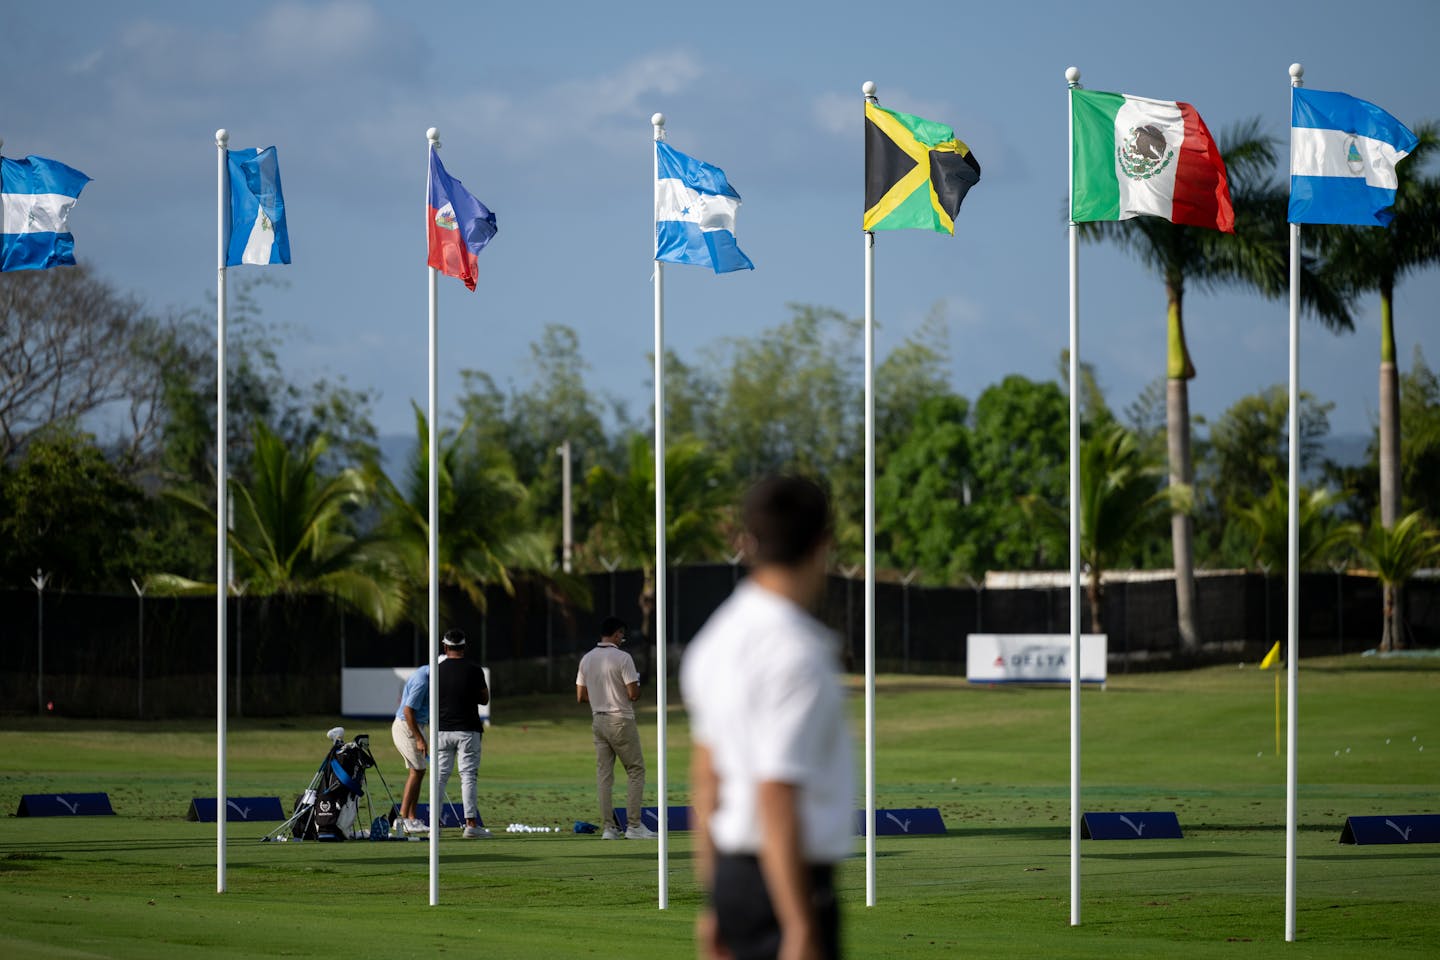 Flags fly in the breeze as golfers play on the practice range.